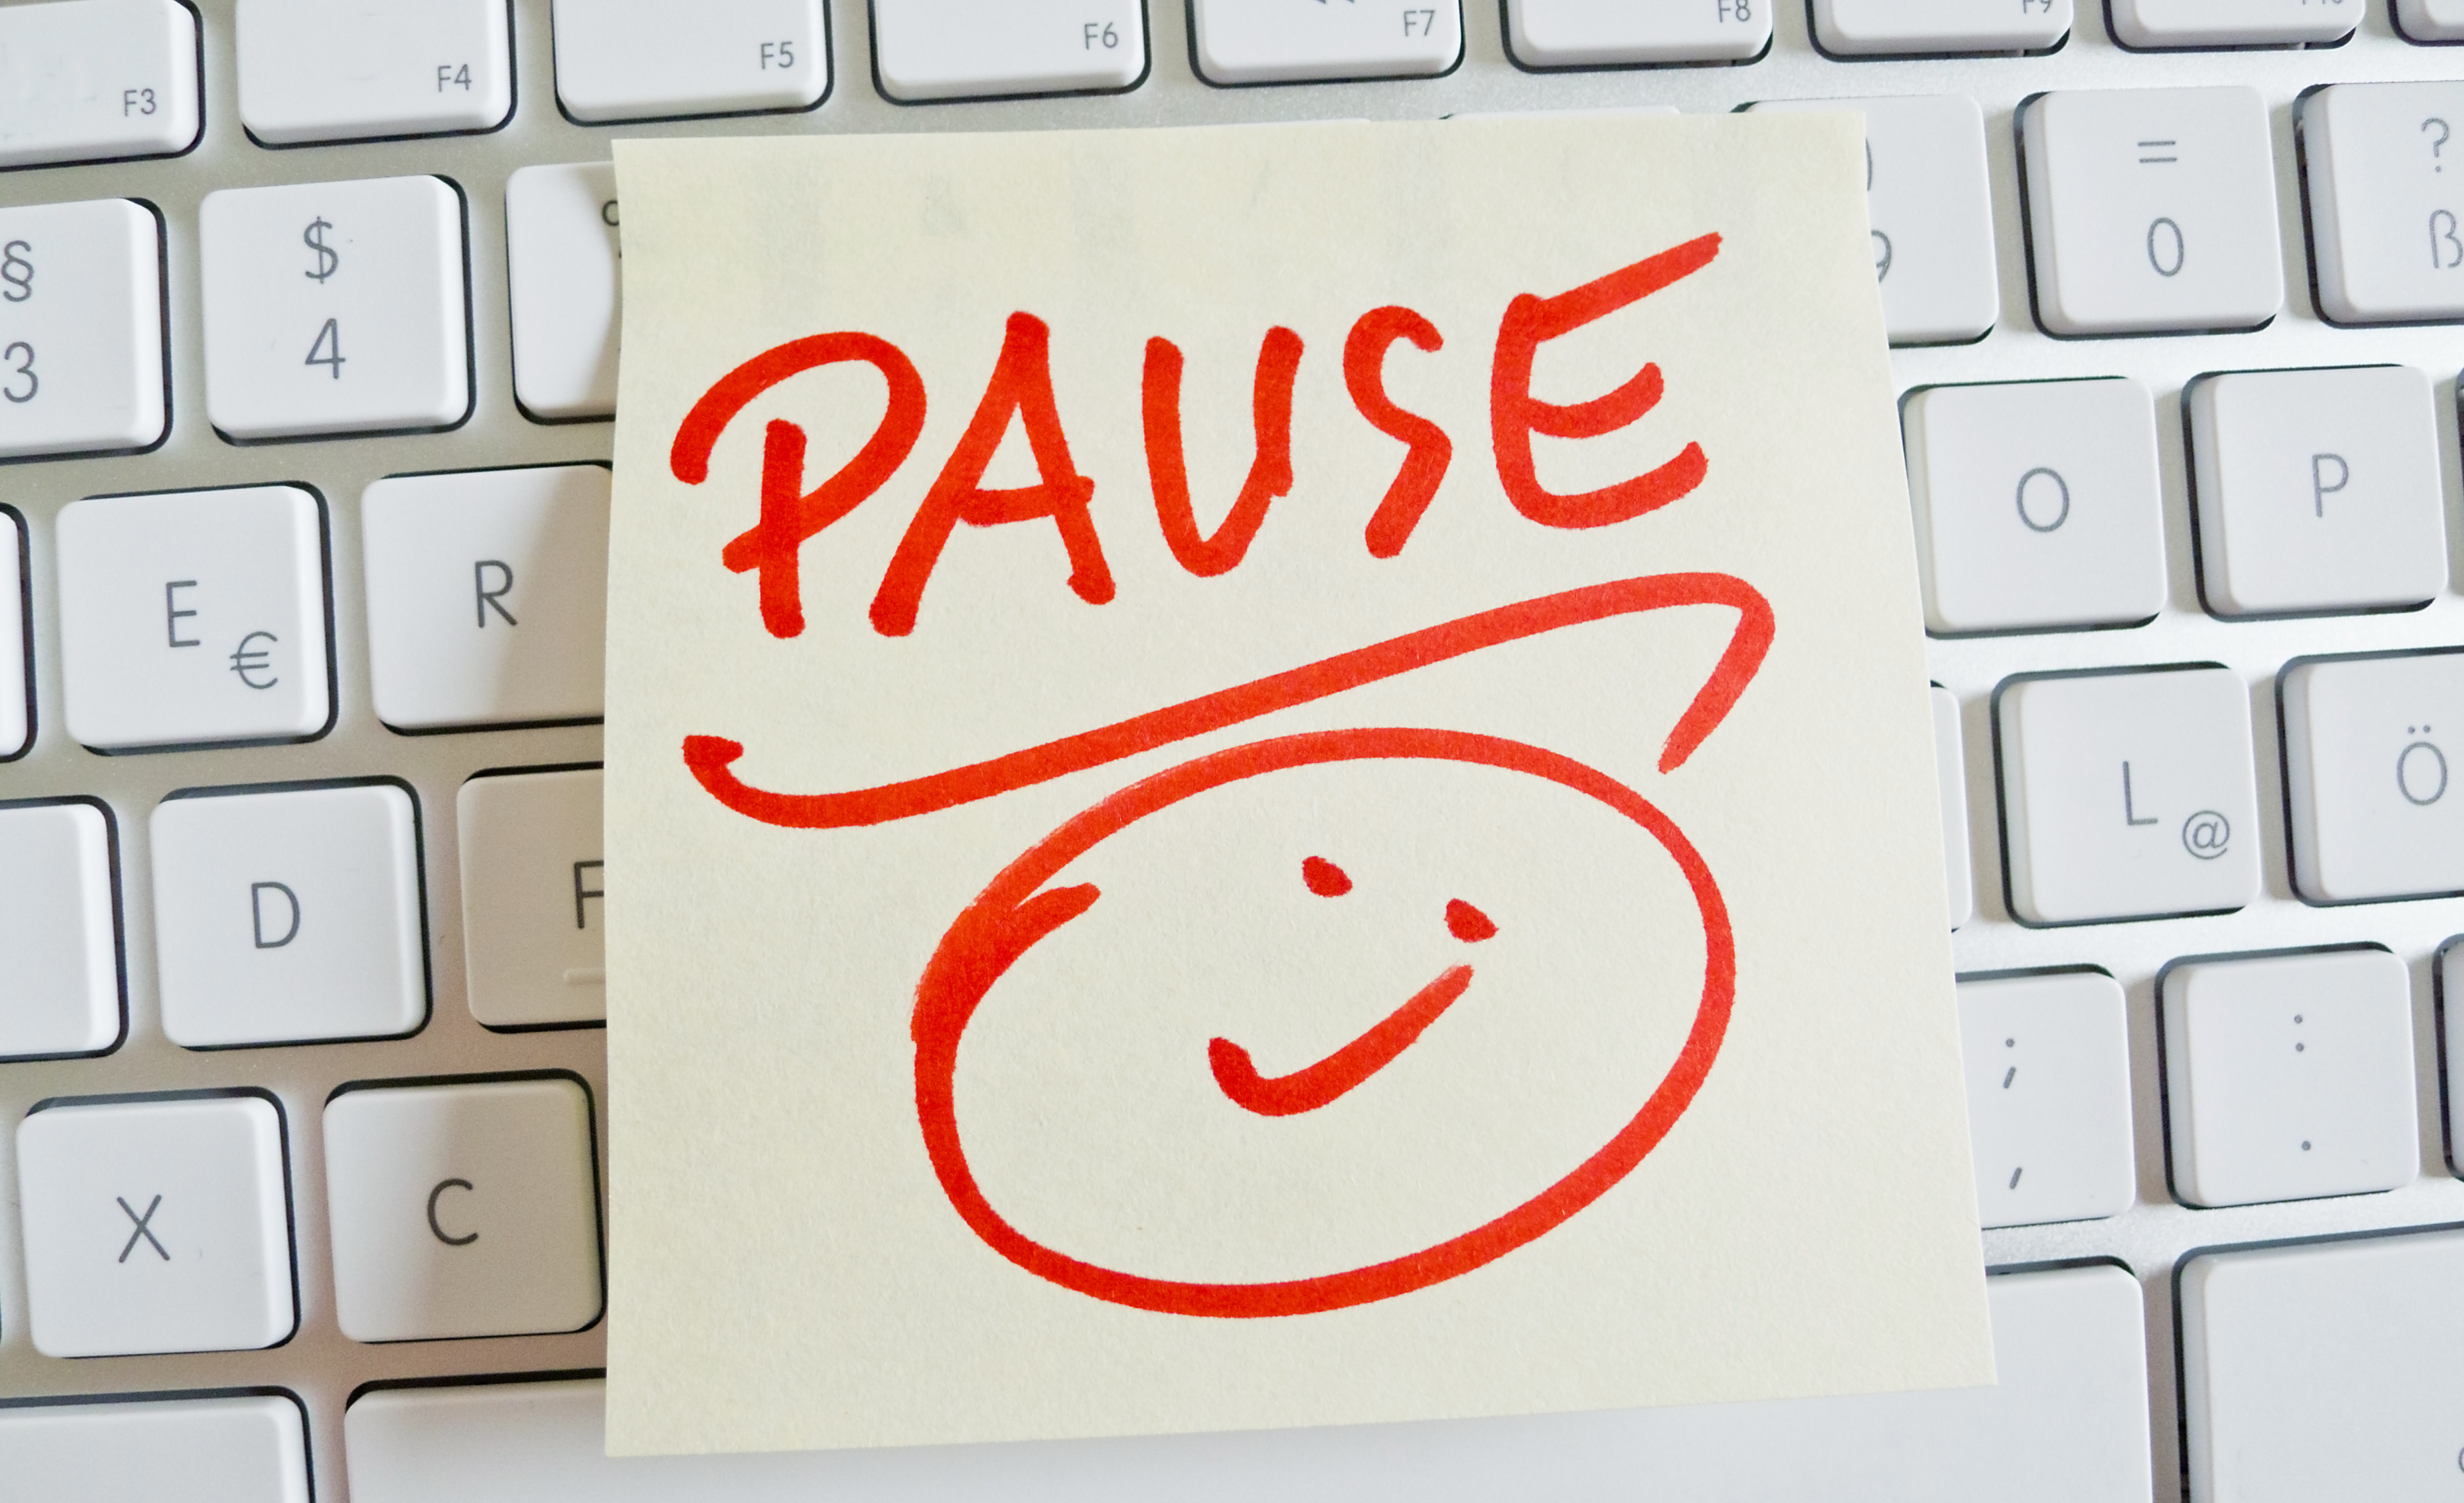 pause post-it note on keyboard